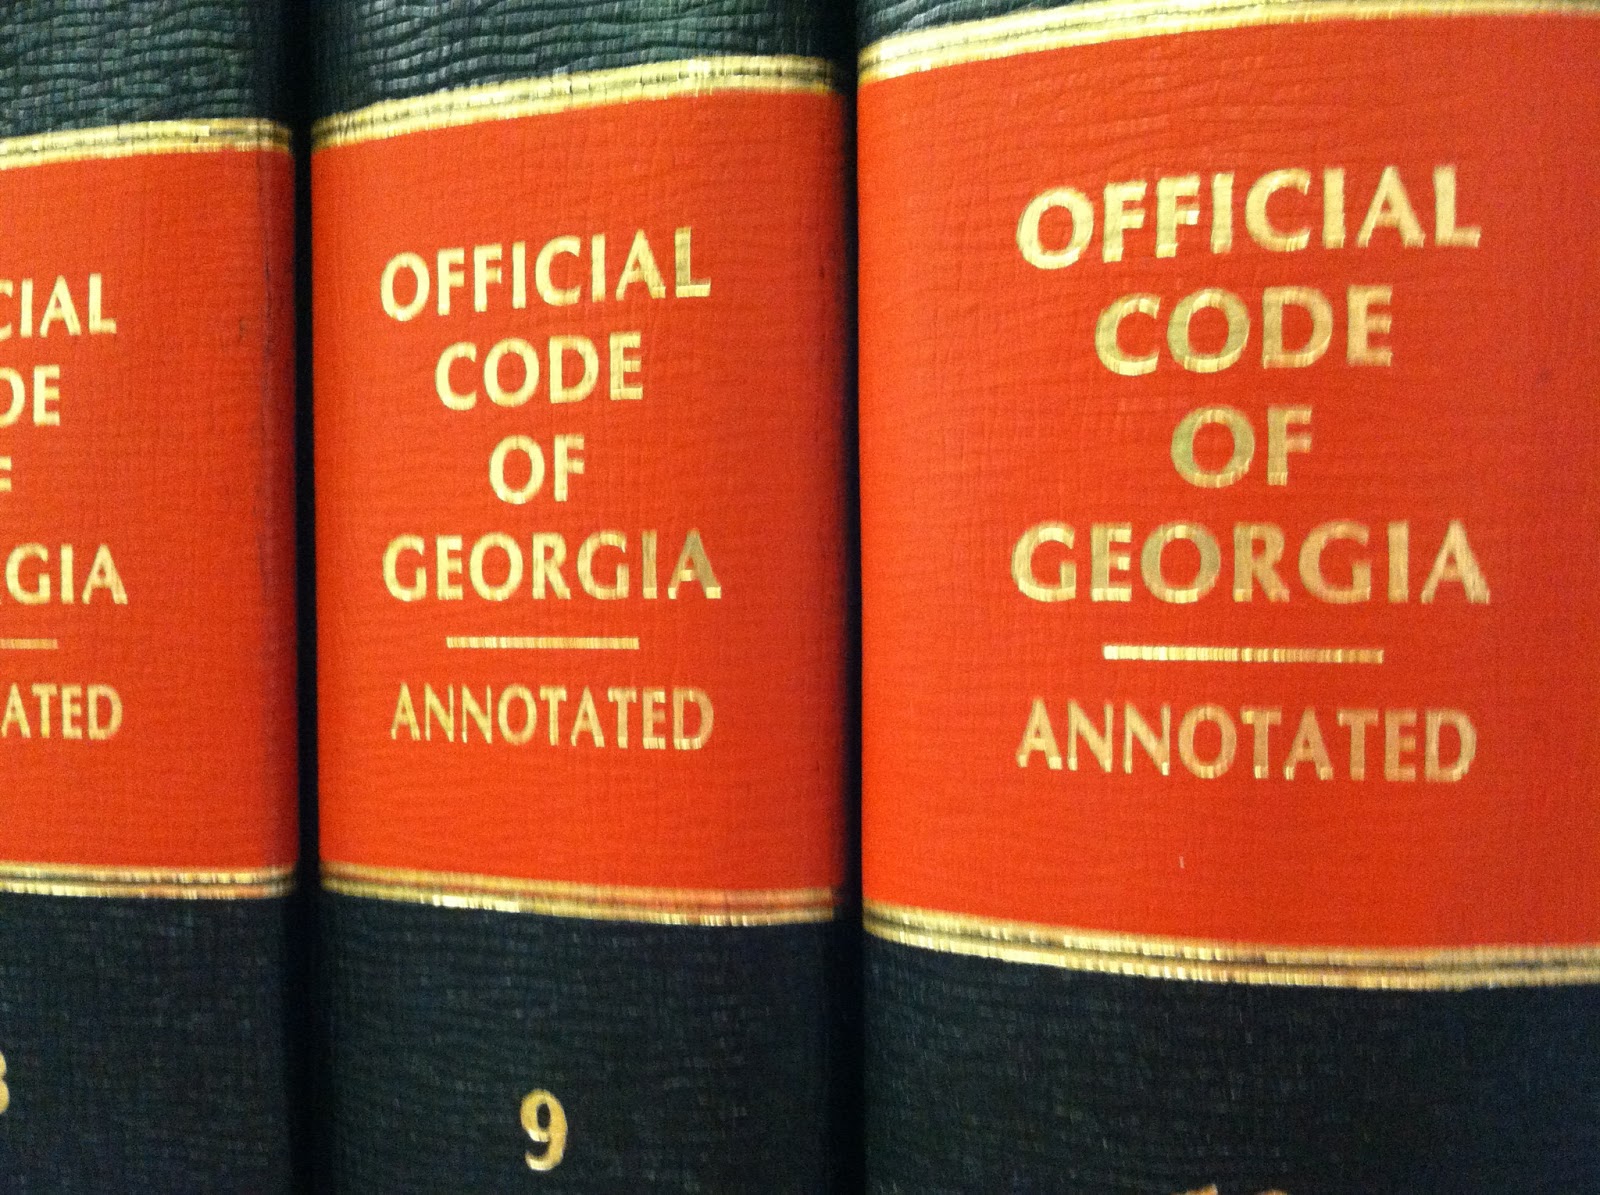 Nonprofit May not Provide Free Access to the Official Code of Georgia